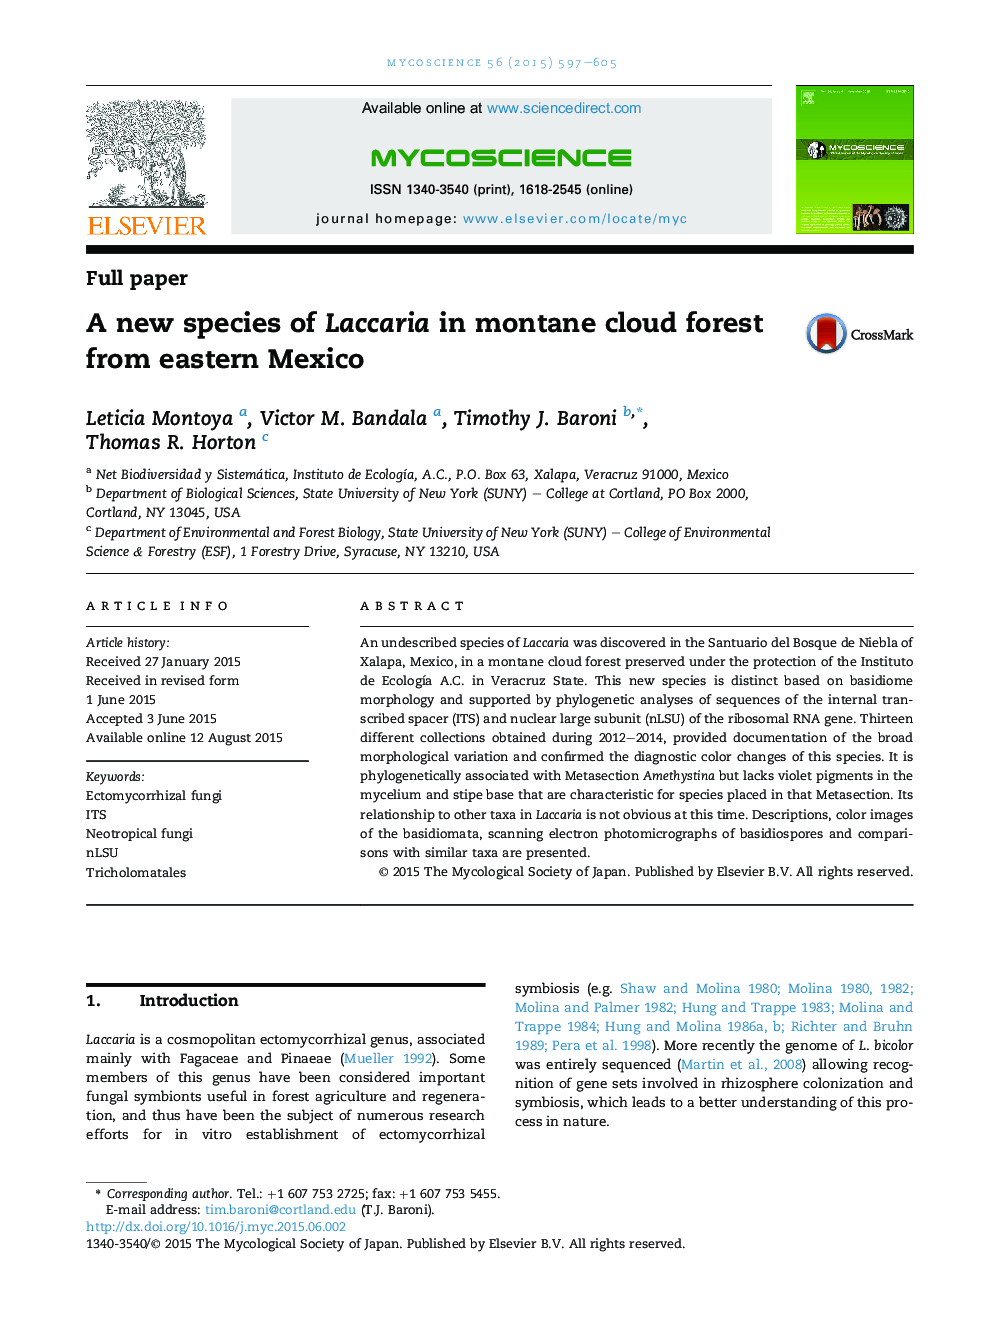 A new species of Laccaria in montane cloud forest from eastern Mexico